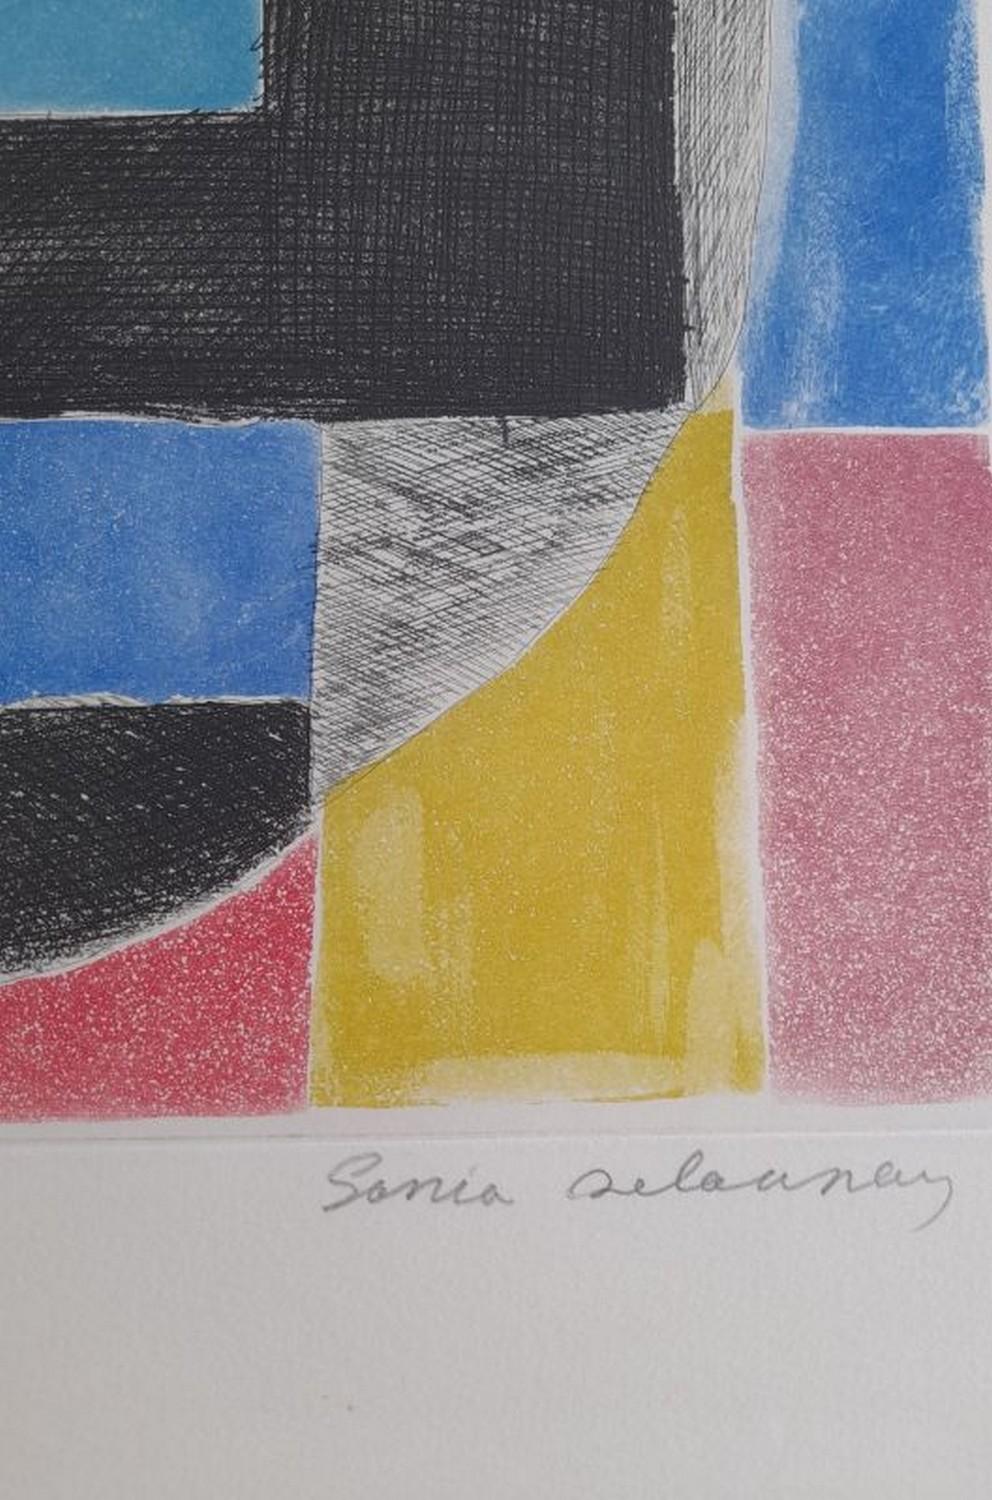 Cathedral  - Print by Sonia Delaunay